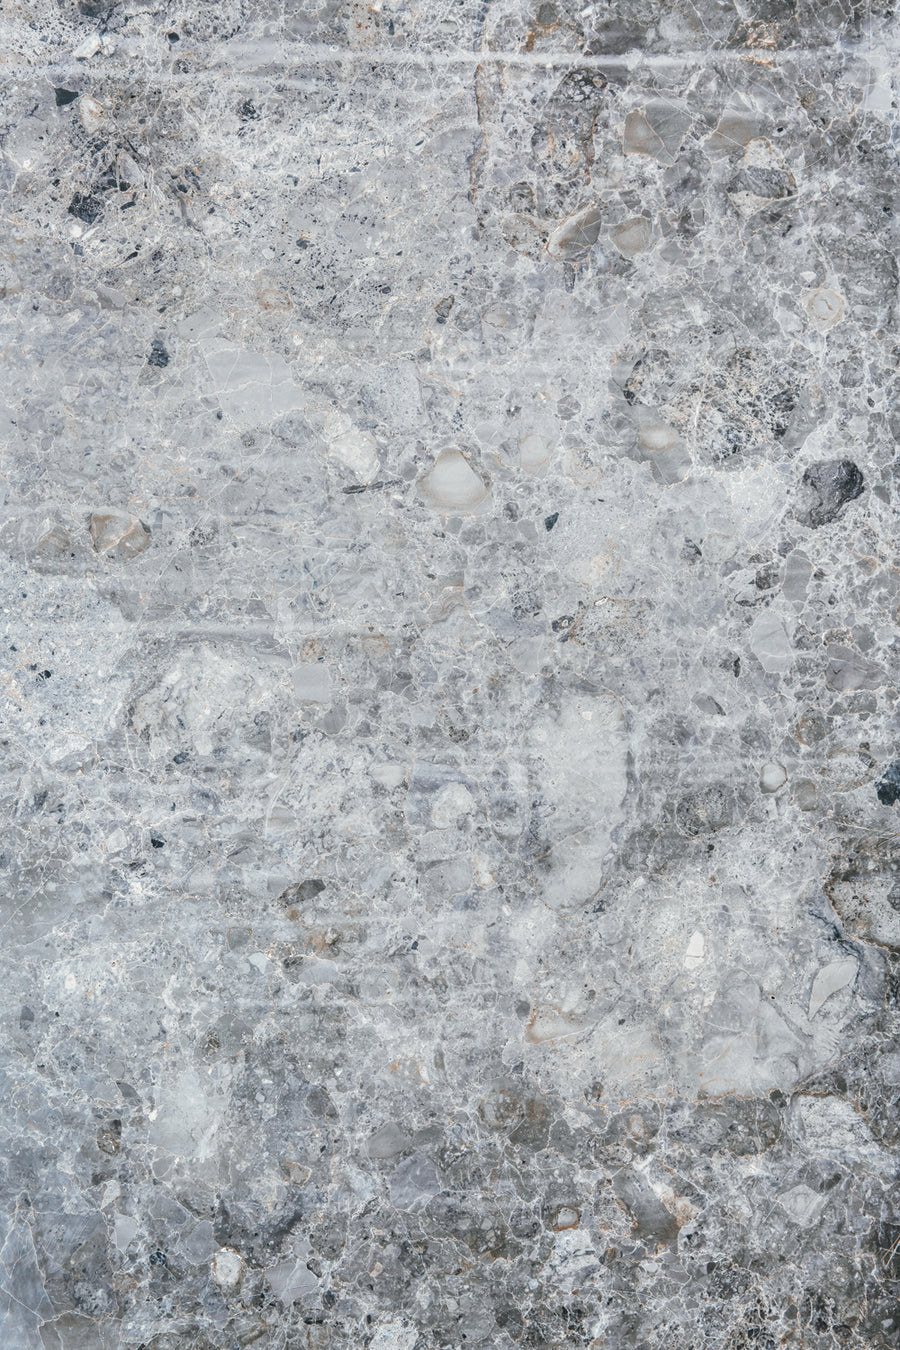 Rustic stone gray photography surface